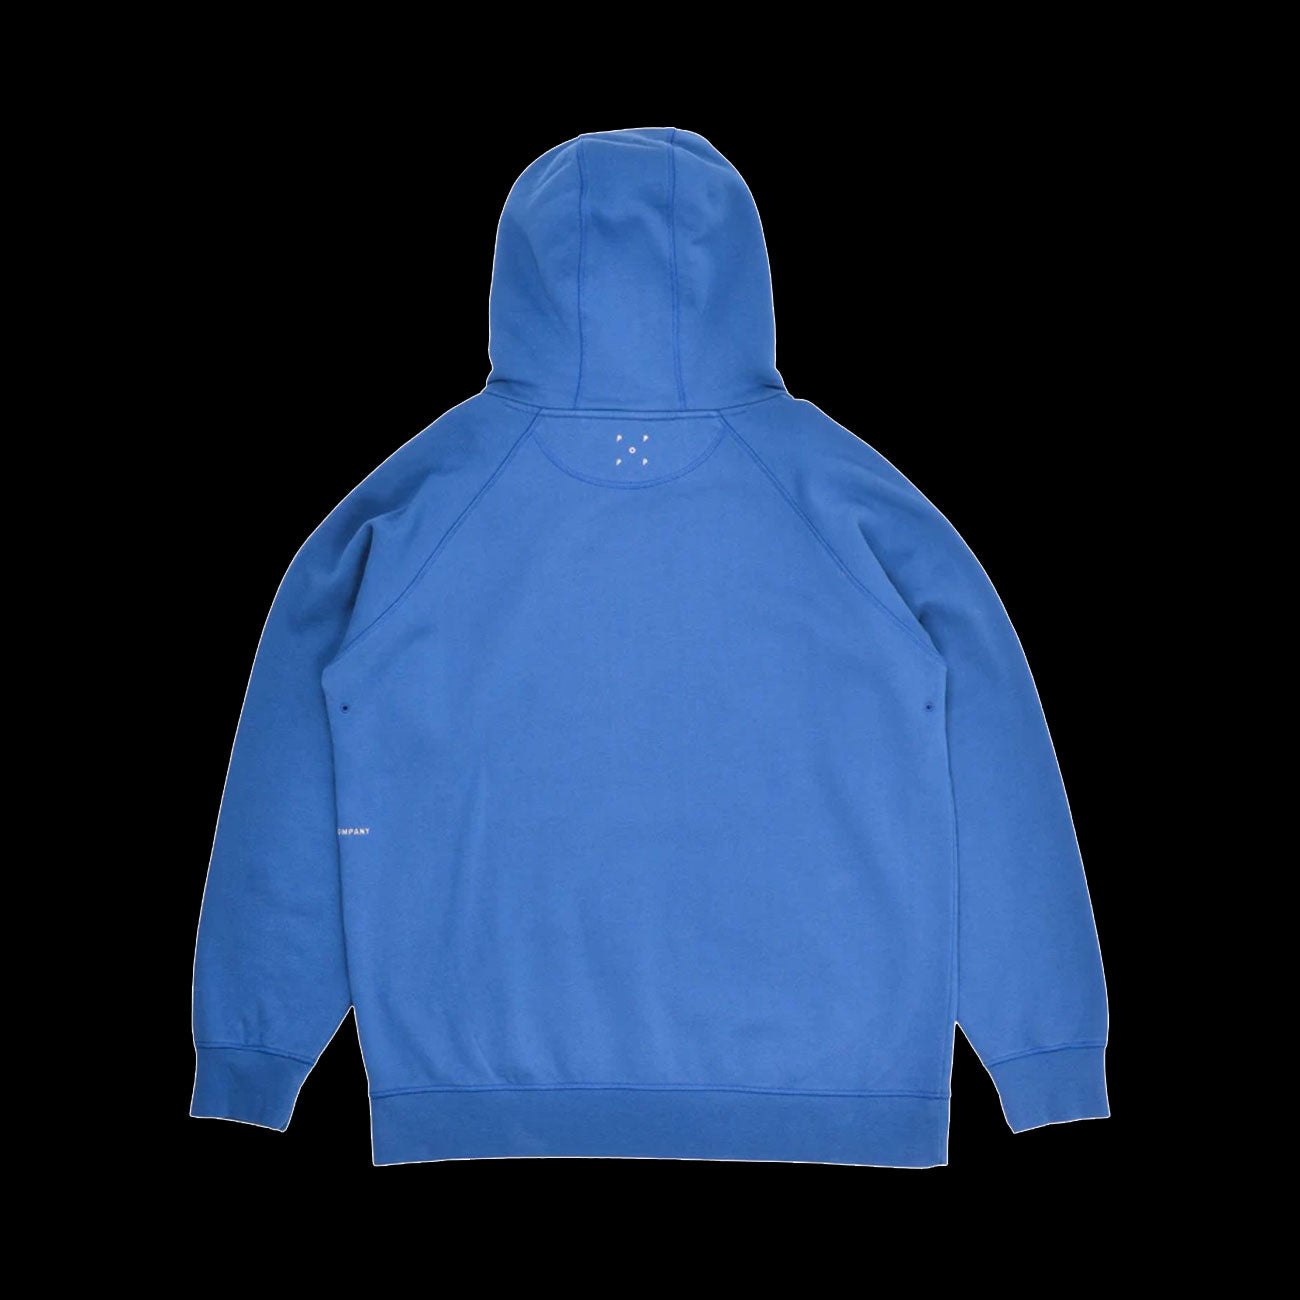 Pop Trading Company Arch Hooded Sweatshirt (Limoges)